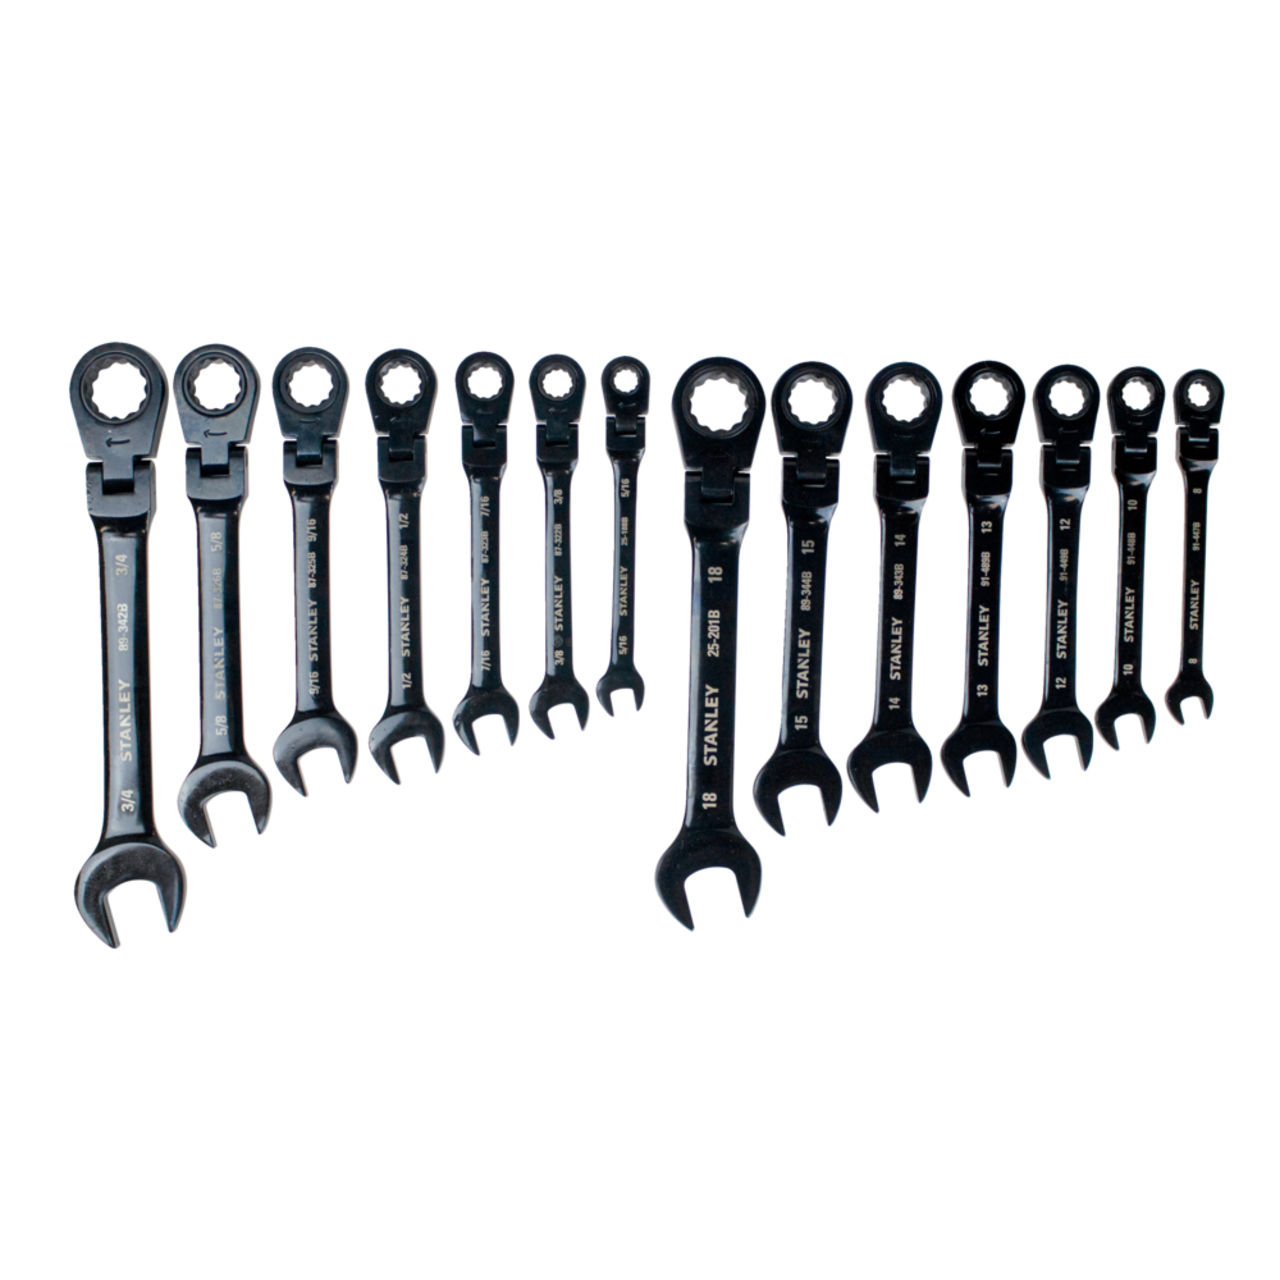 TR TOOLROCK 7pcs Flex-Head Ratcheting Wrench Set, Metric Ratcheting  Combination Wrenches, Chrome Vanadium Steel, 72-Teeth Construction with  Organizer